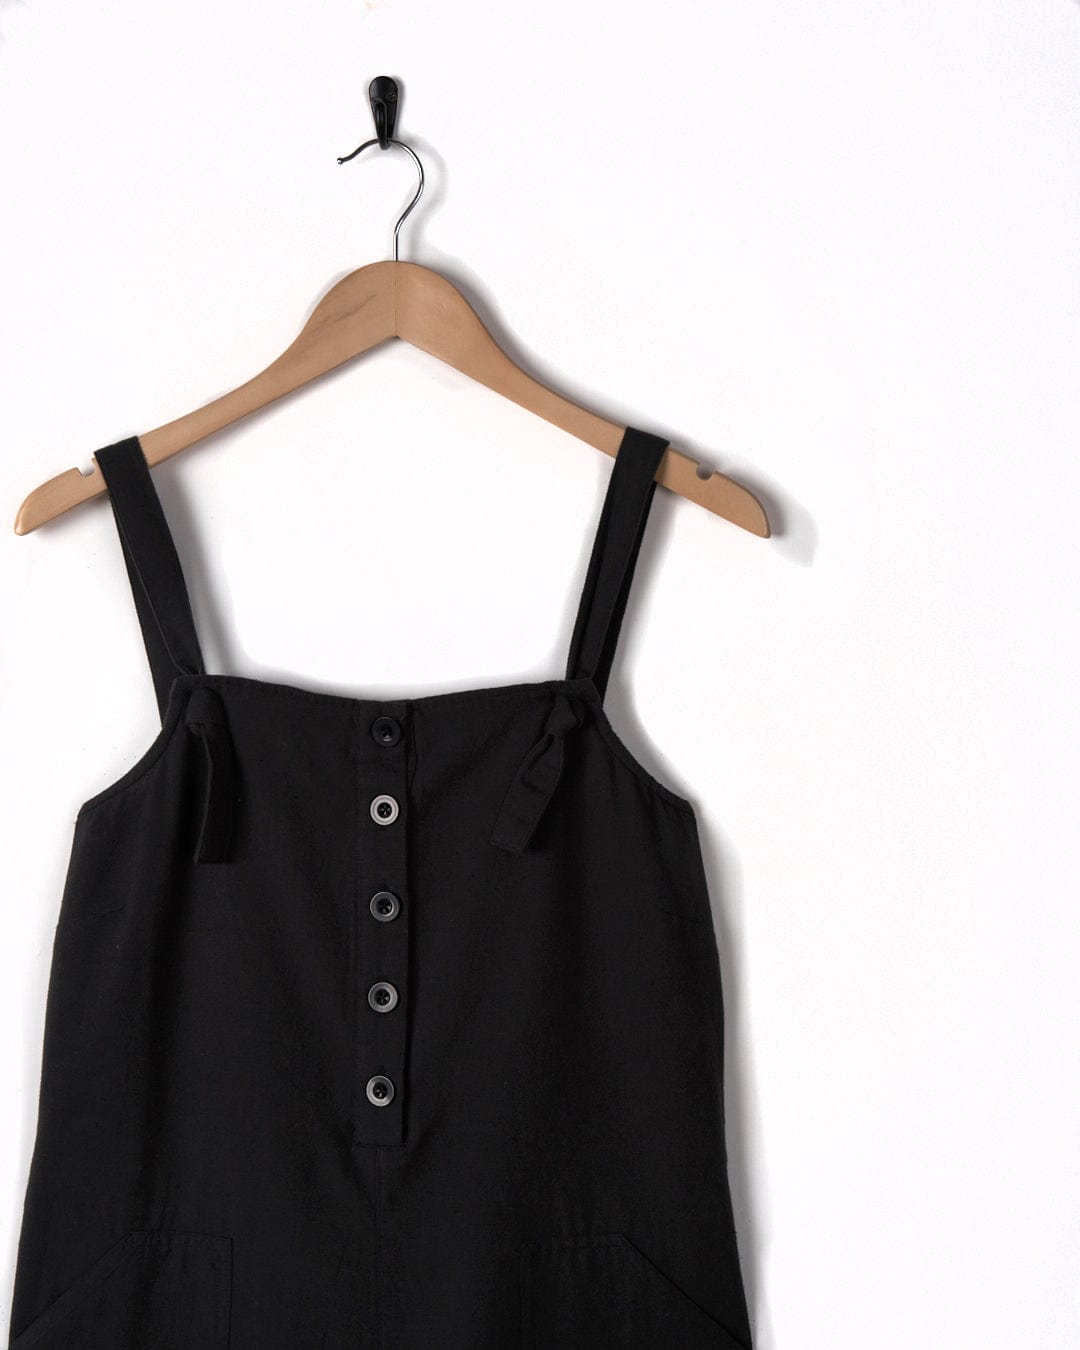 A pair of Nancy - Women's Dungarees - Dark Grey by Saltrock is hanging on a wooden hanger against a white background.